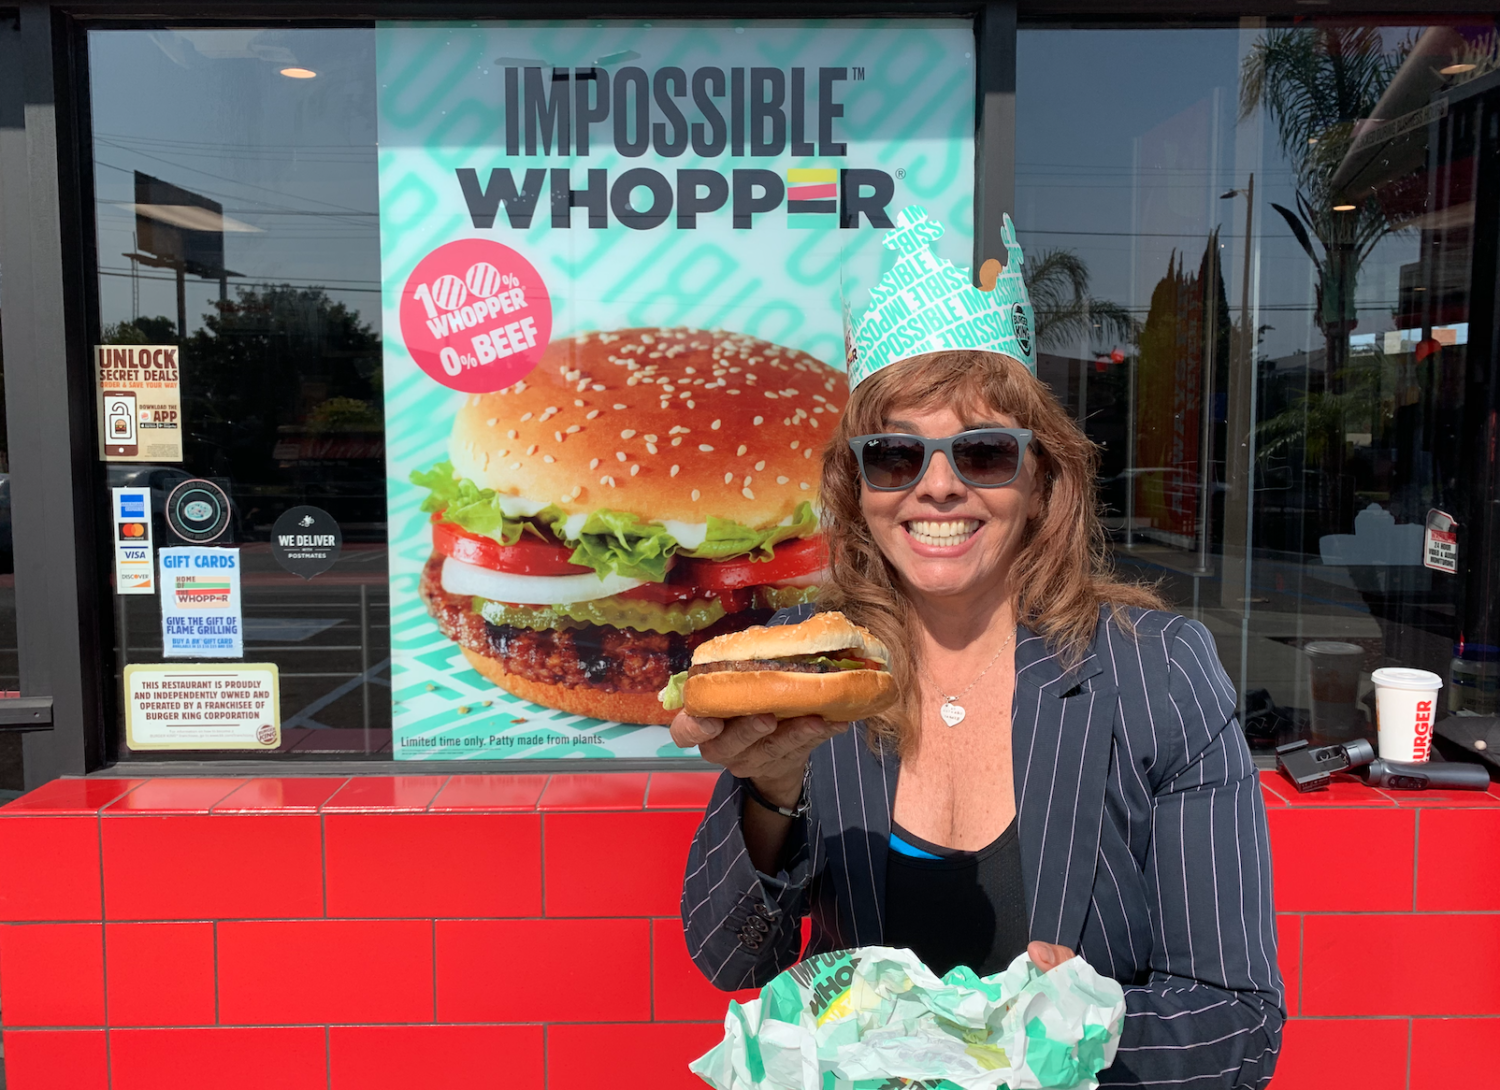 Jane holds up an Impossible Whopper